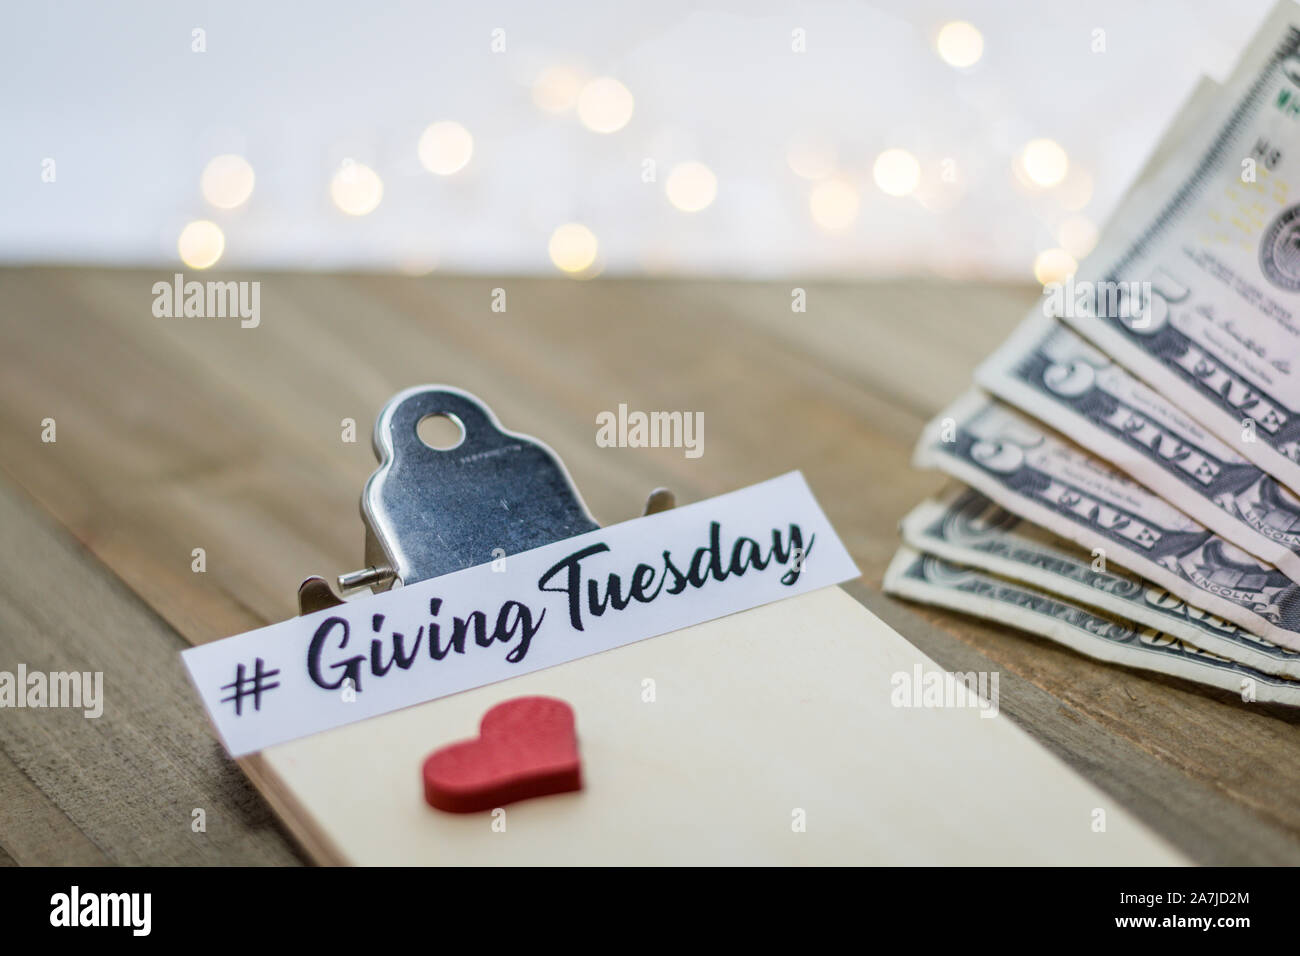 Giving Tuesday donate charity concept with text and cash credit cards on wooden board Stock Photo